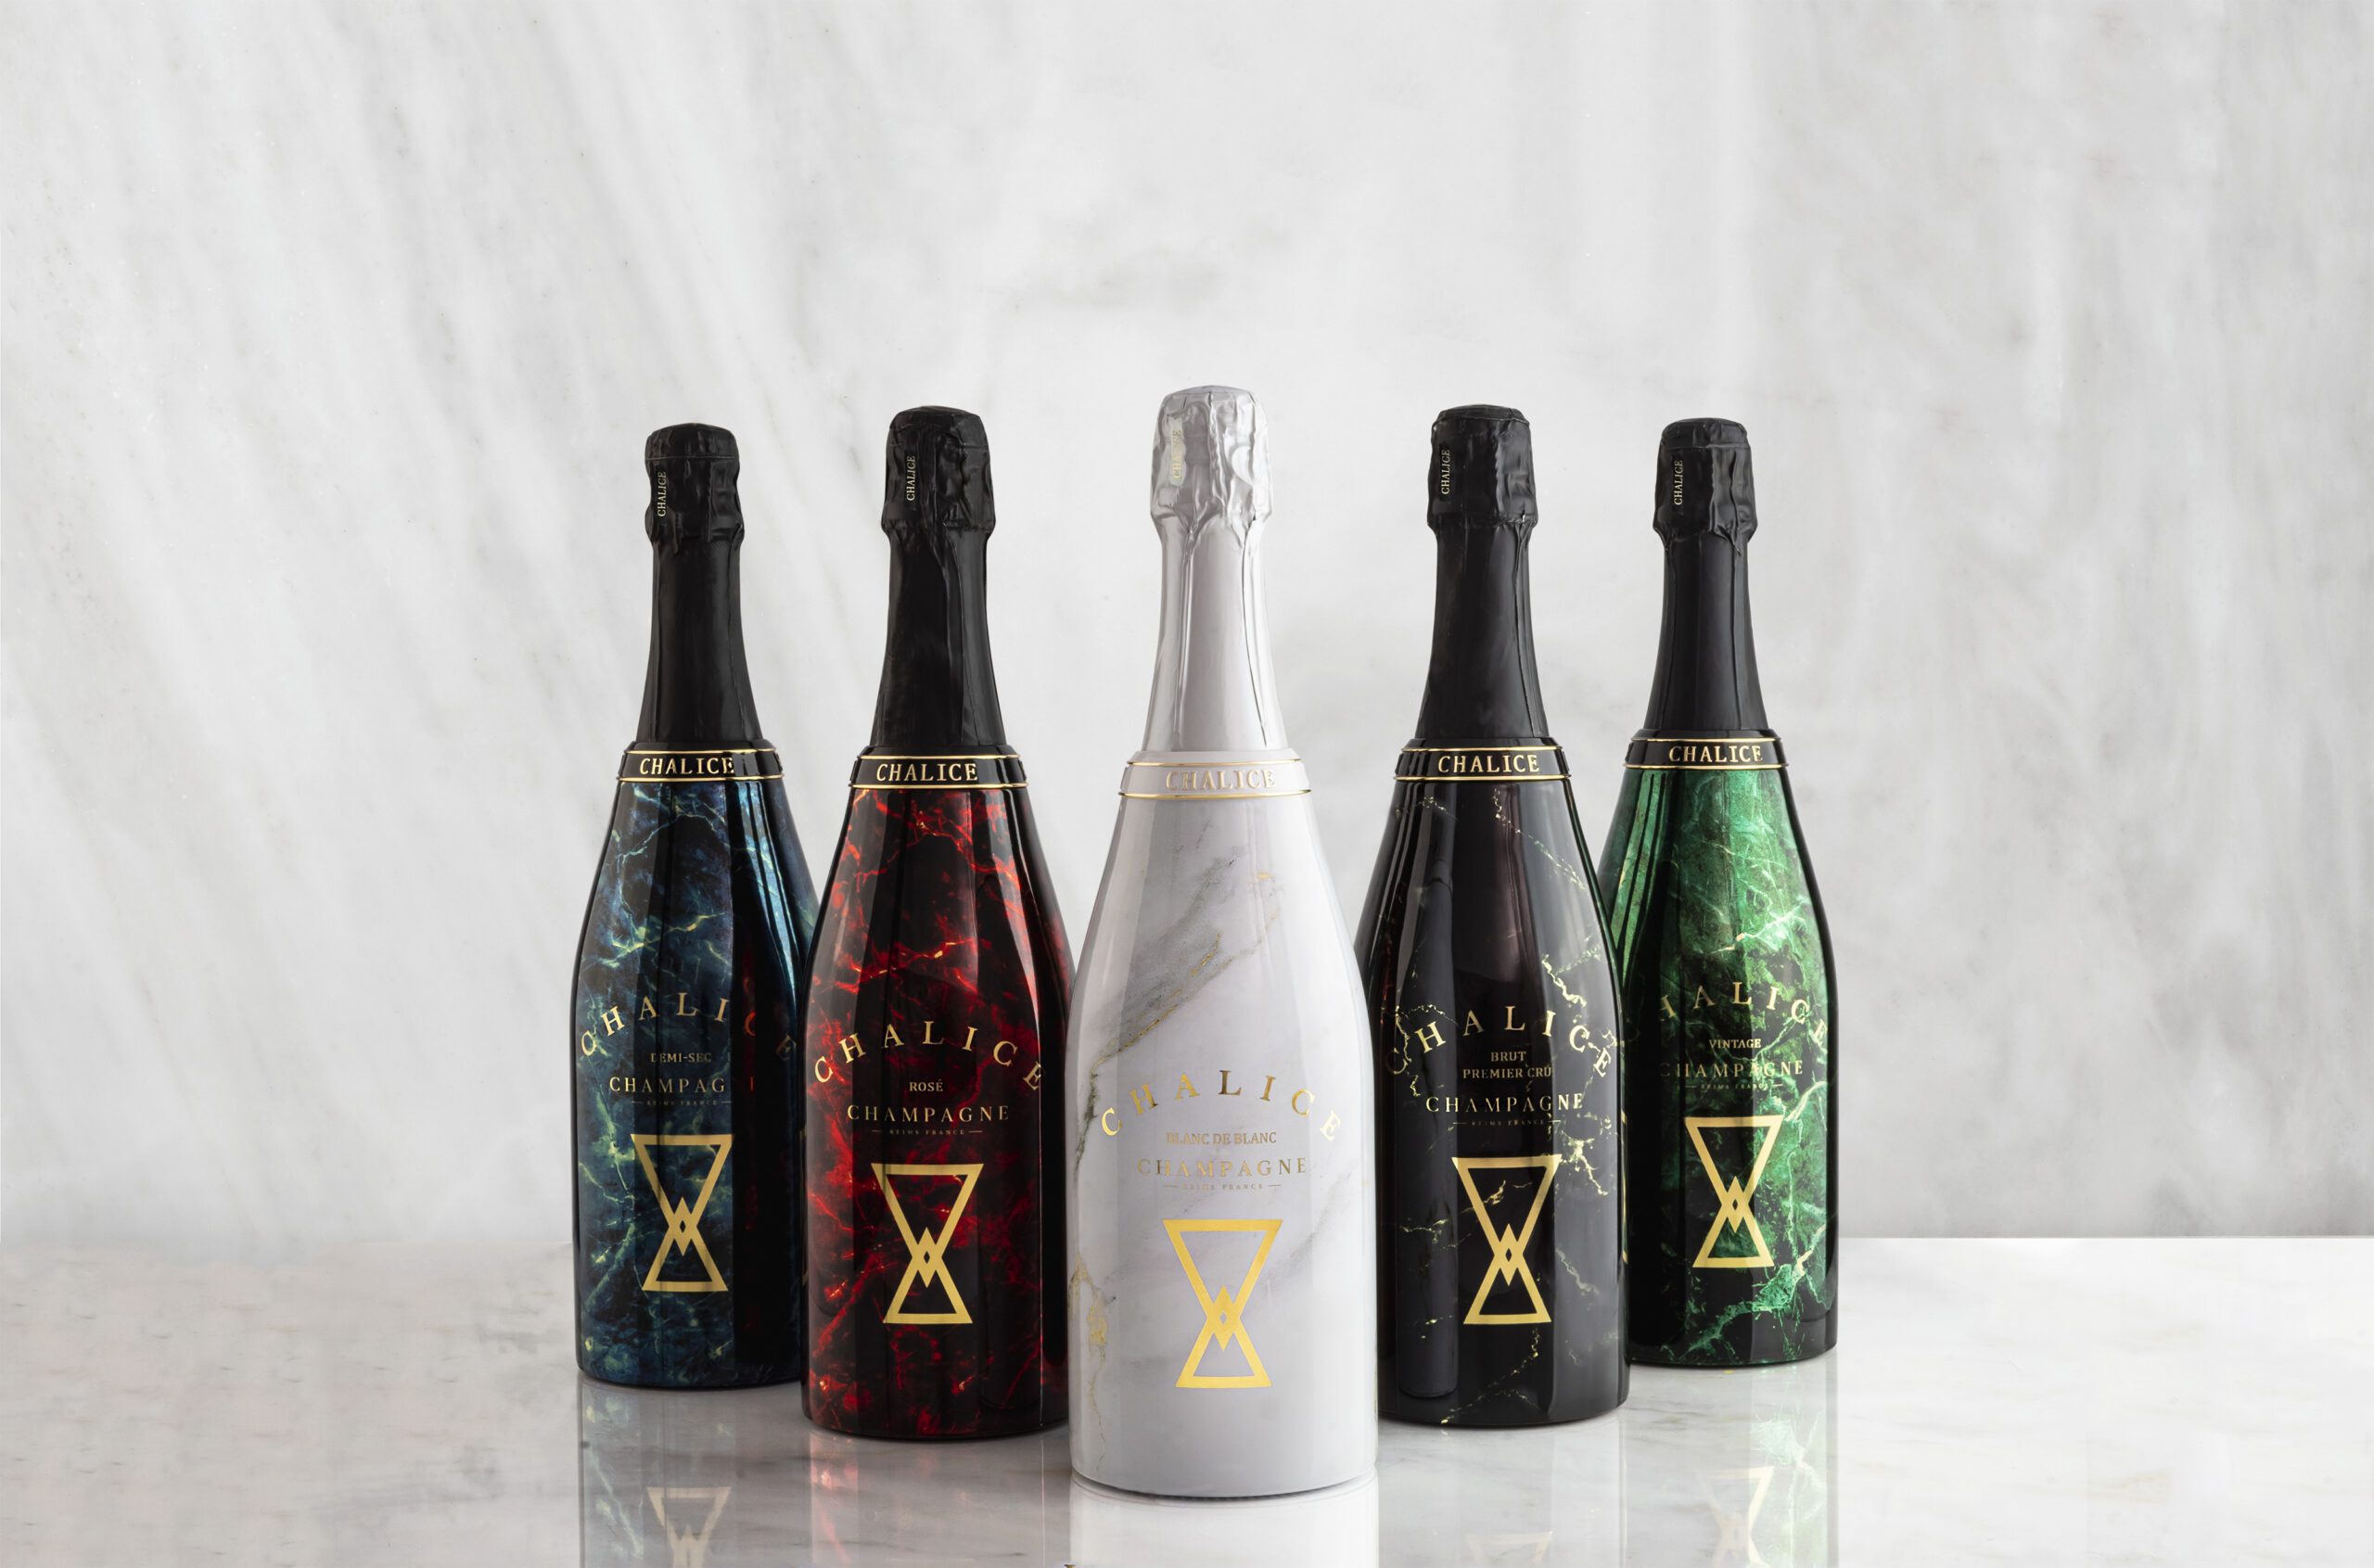 The Chalice Champagne full collection